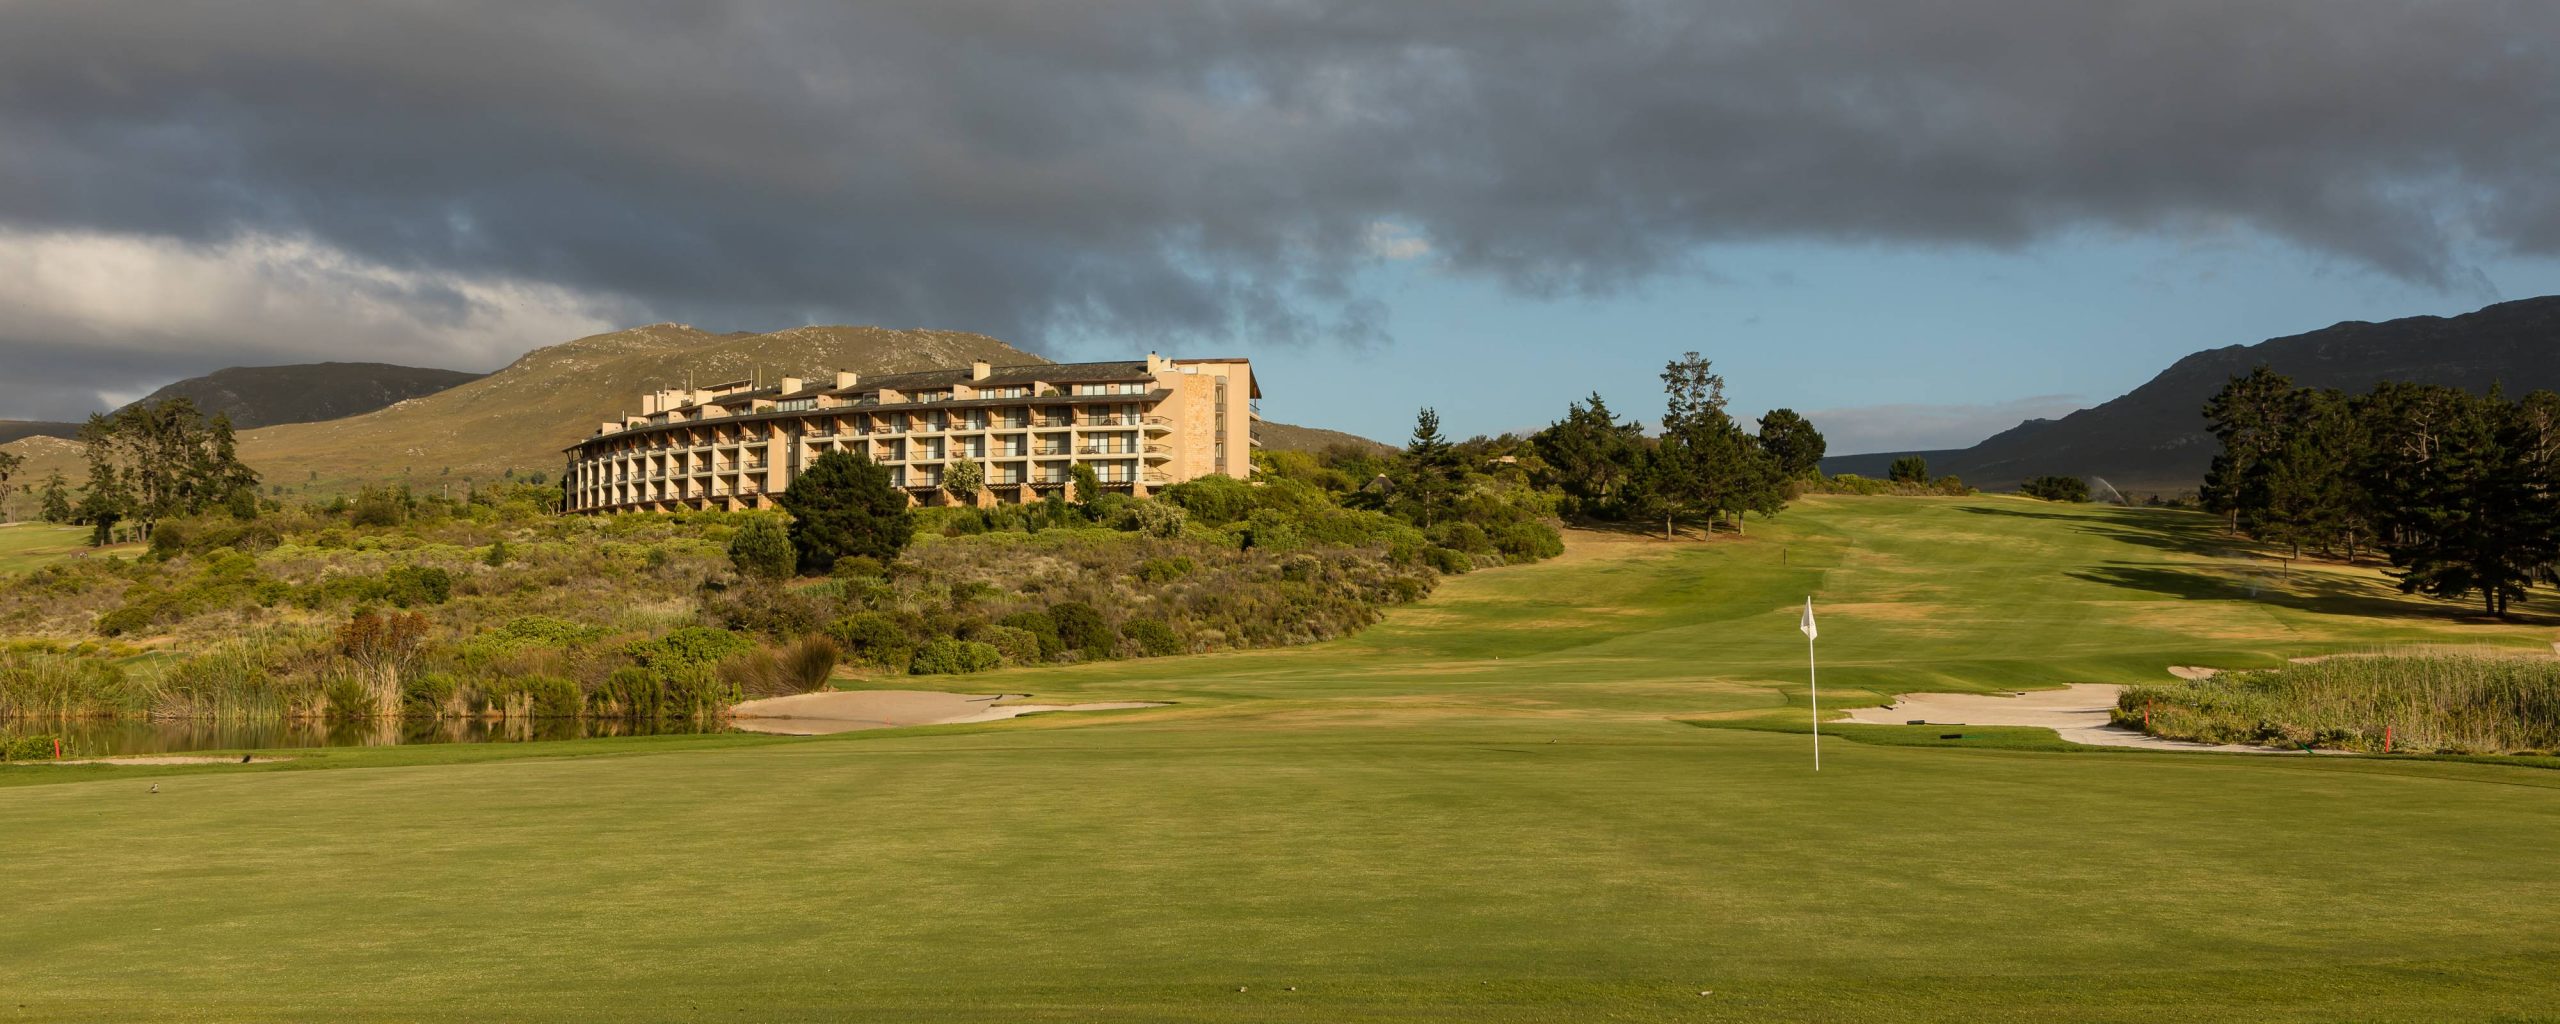 Marriott Signs Deal to Manage First Ever Golf Resort in South Africa